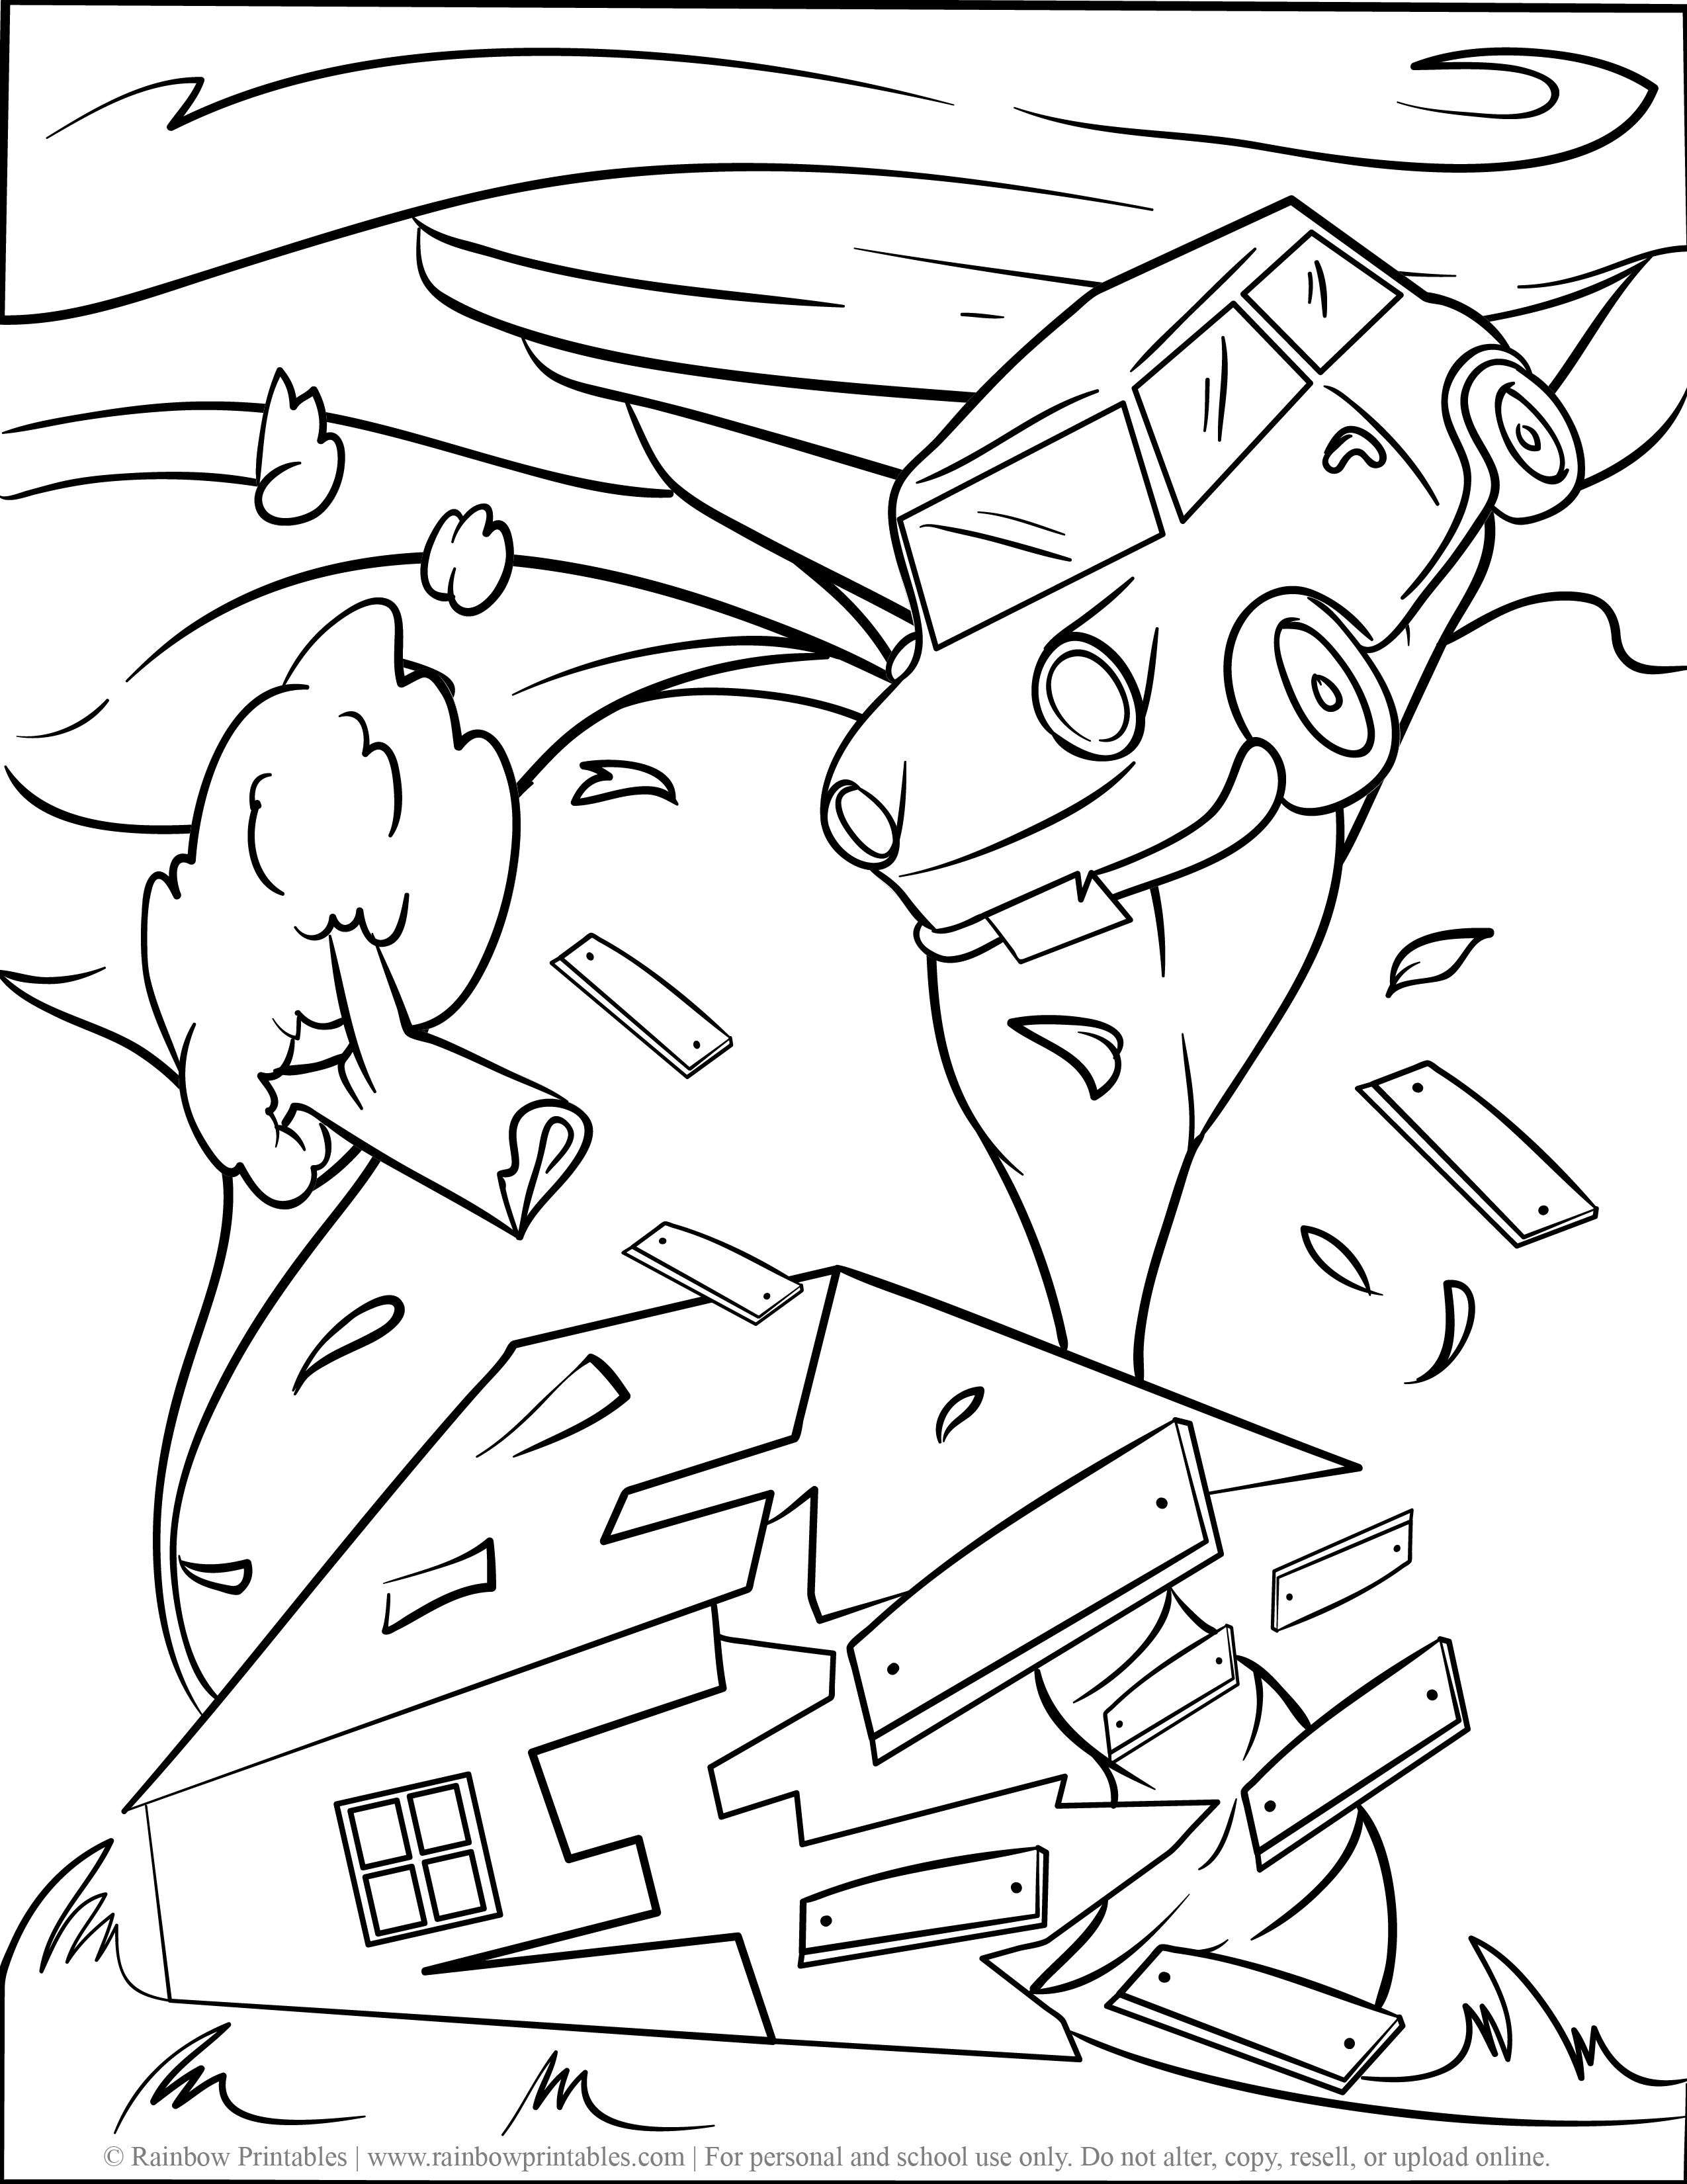 cyclone coloring pages